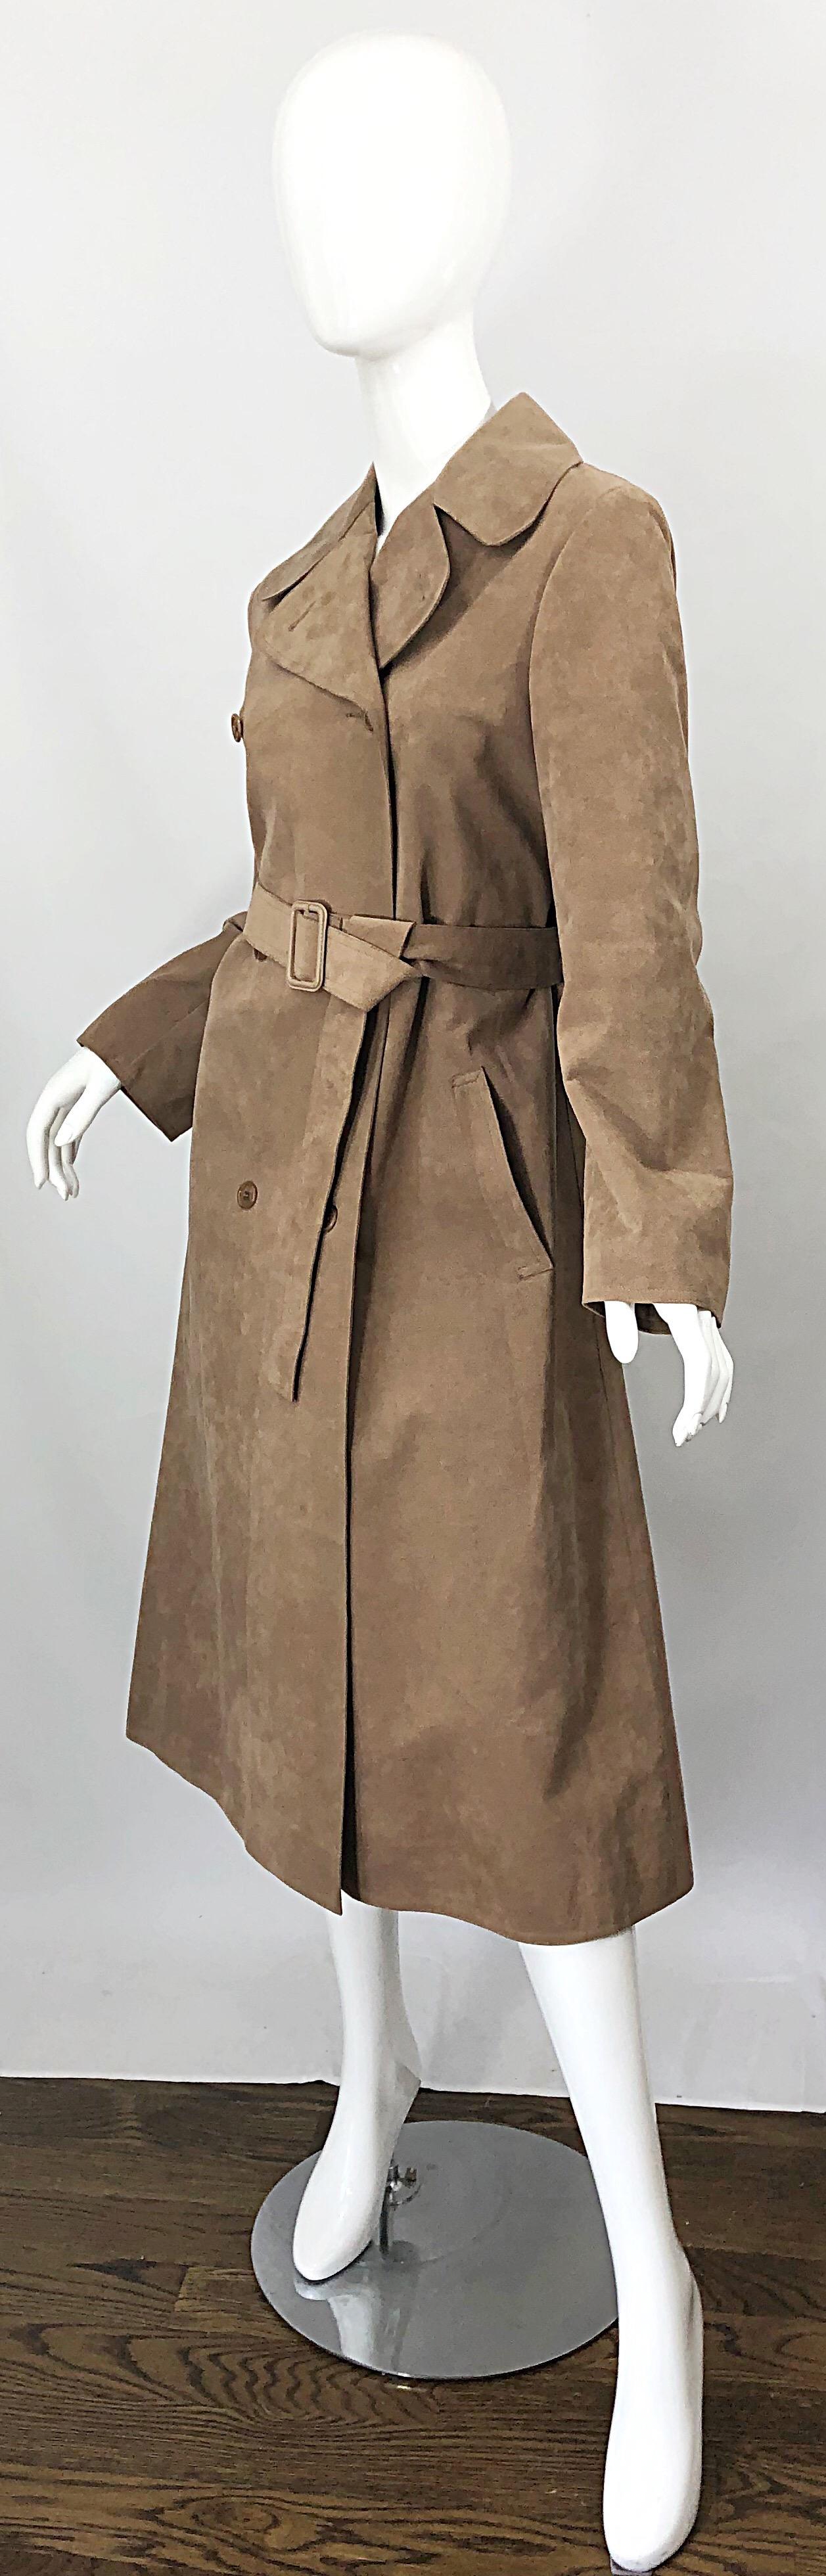 Women's 1970s Halston Ultrasuede Khaki Brown Double Breasted Vintage Spy Trench Jacket